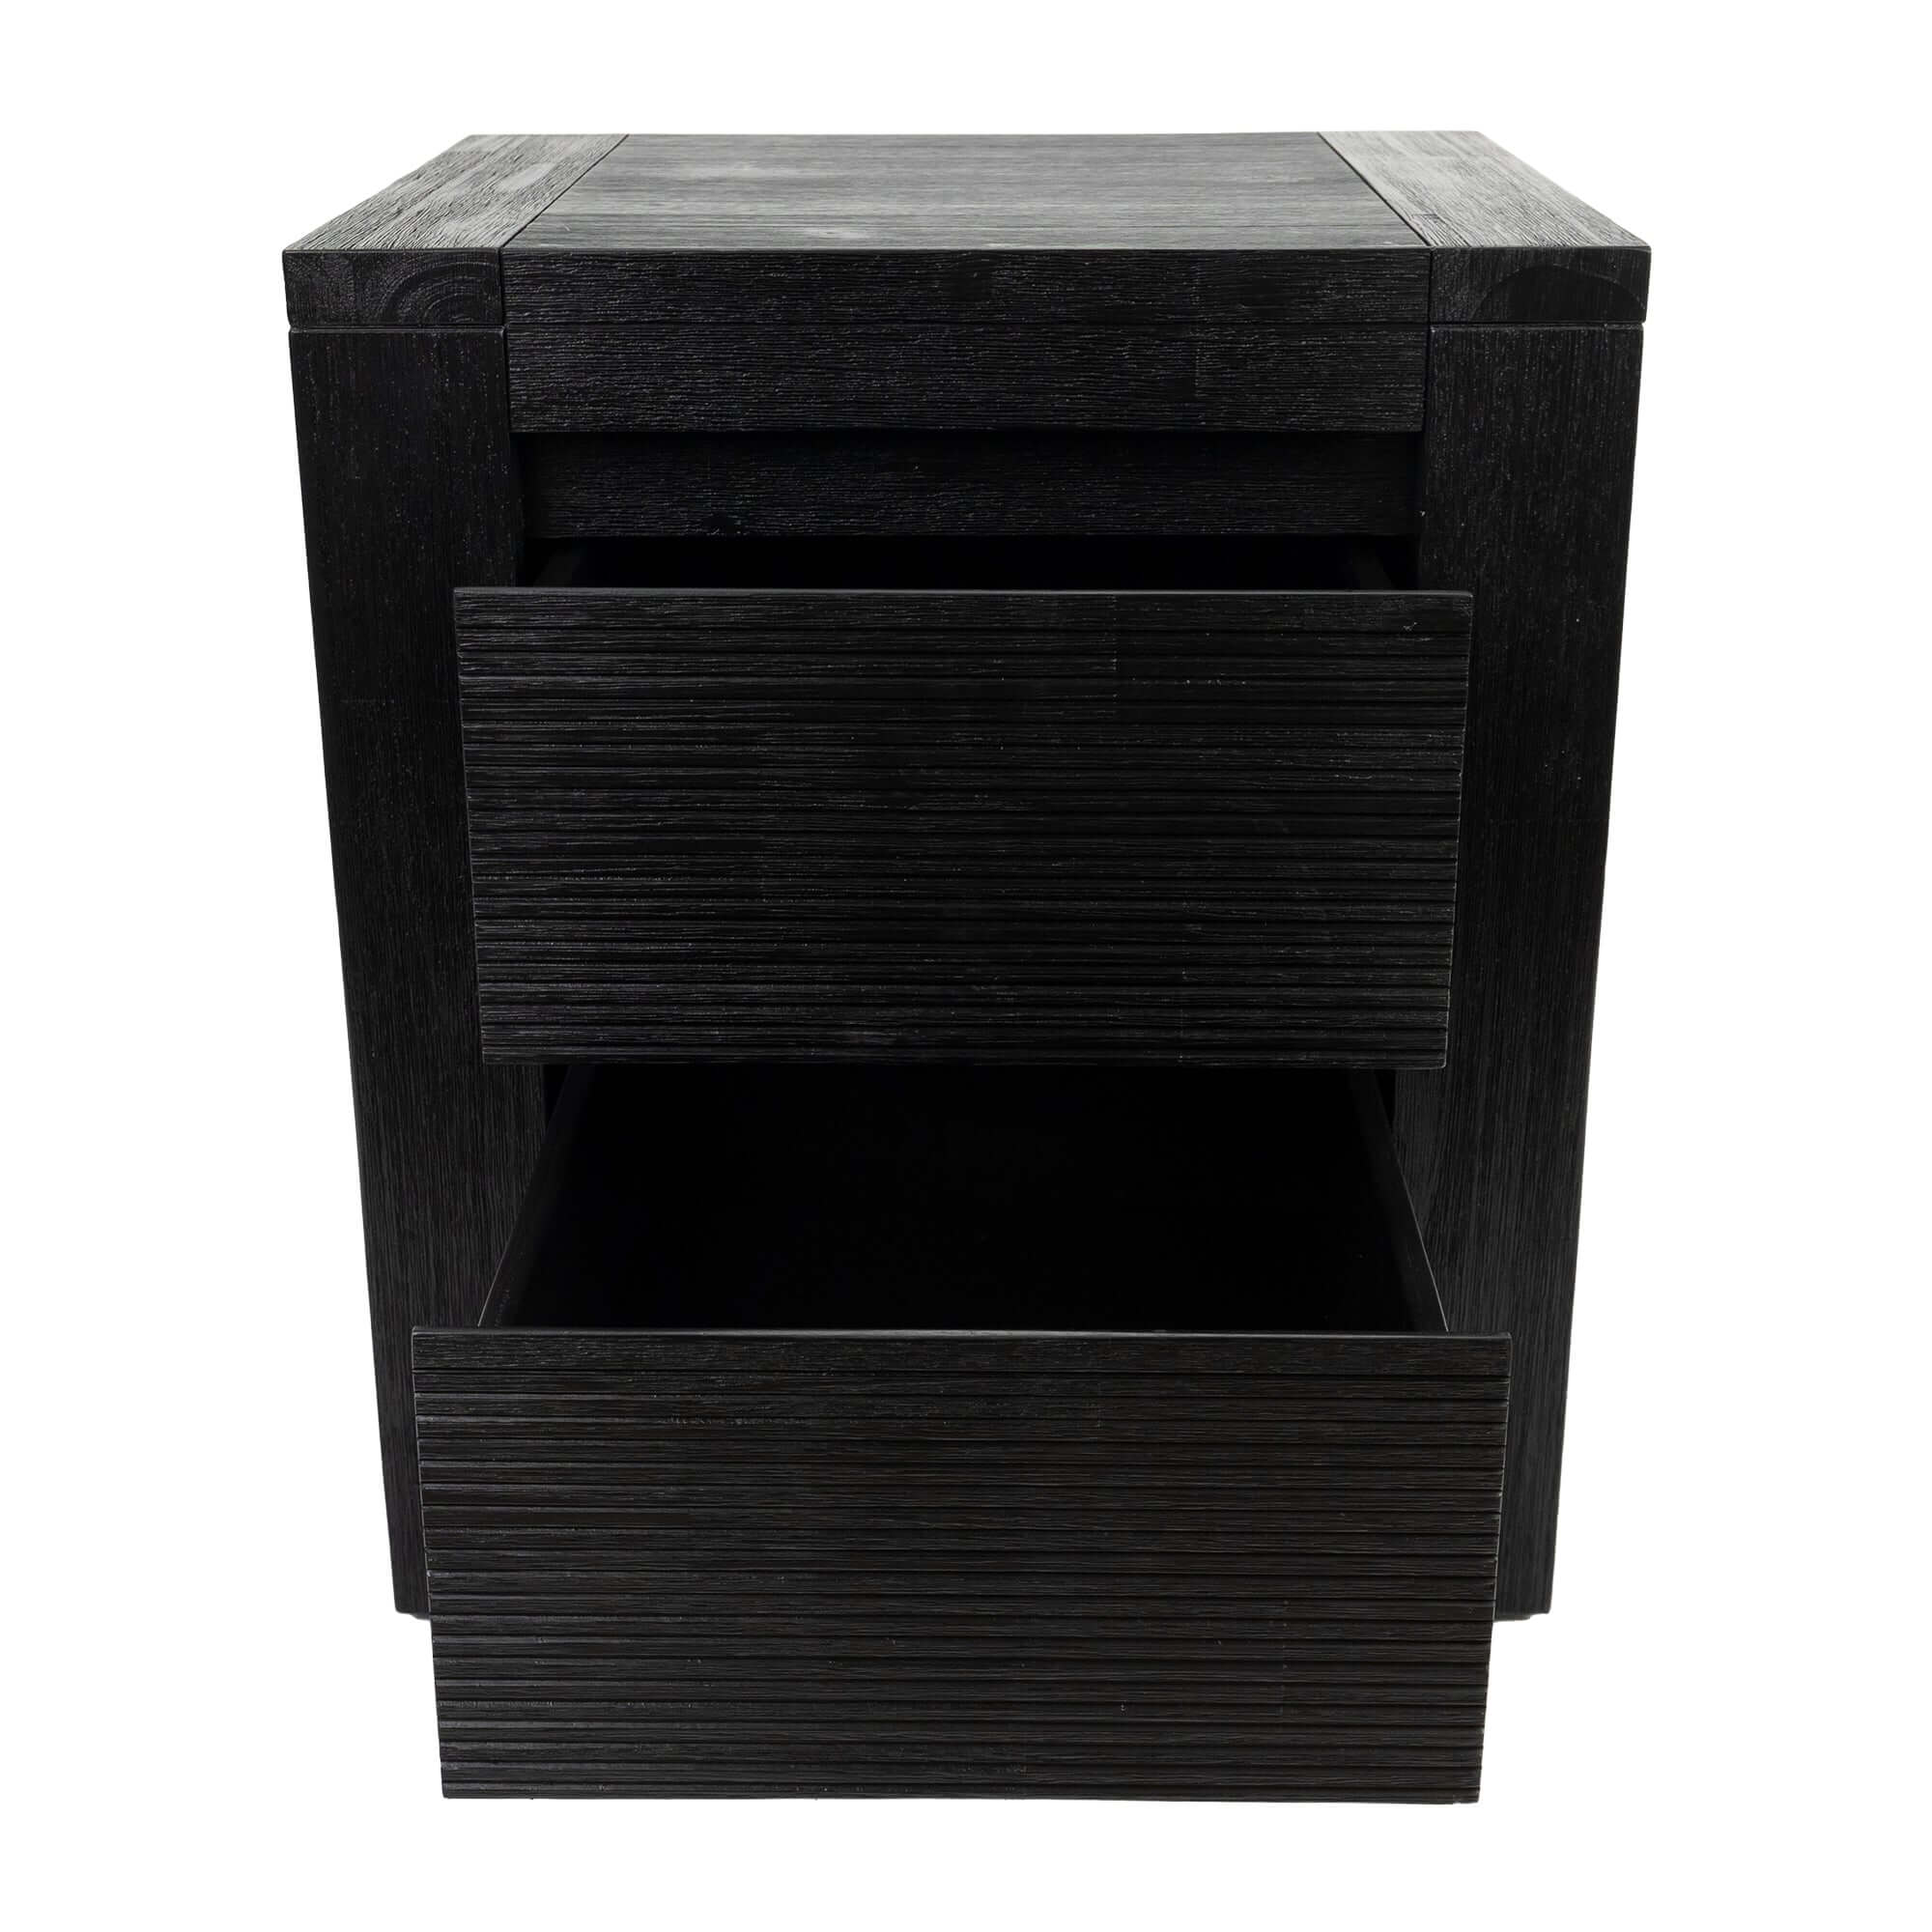 Tofino Set of 2 Bedside Tables 2 Drawers Storage Cabinet Side End Table - Black-Upinteriors